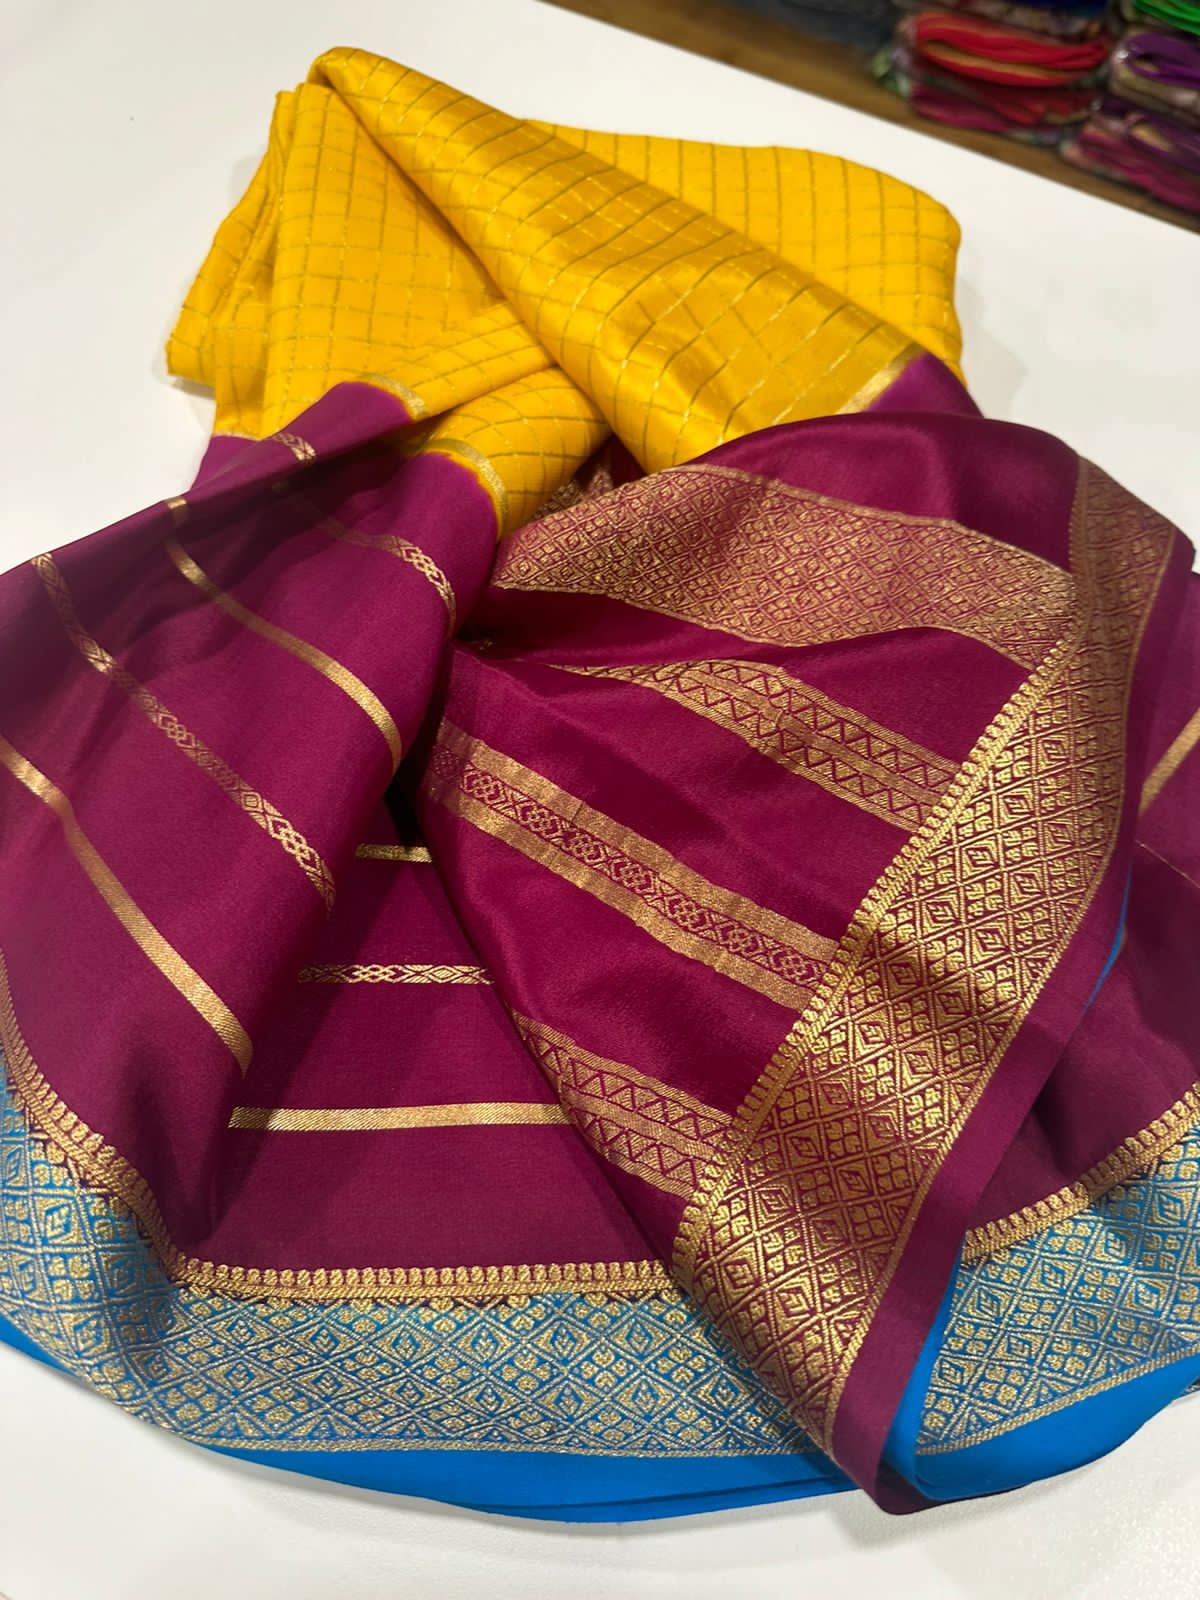 Pure Mysore silk sarees with 120 grm thickness and rich pallu, exclusive designs along with beautiful color combinations